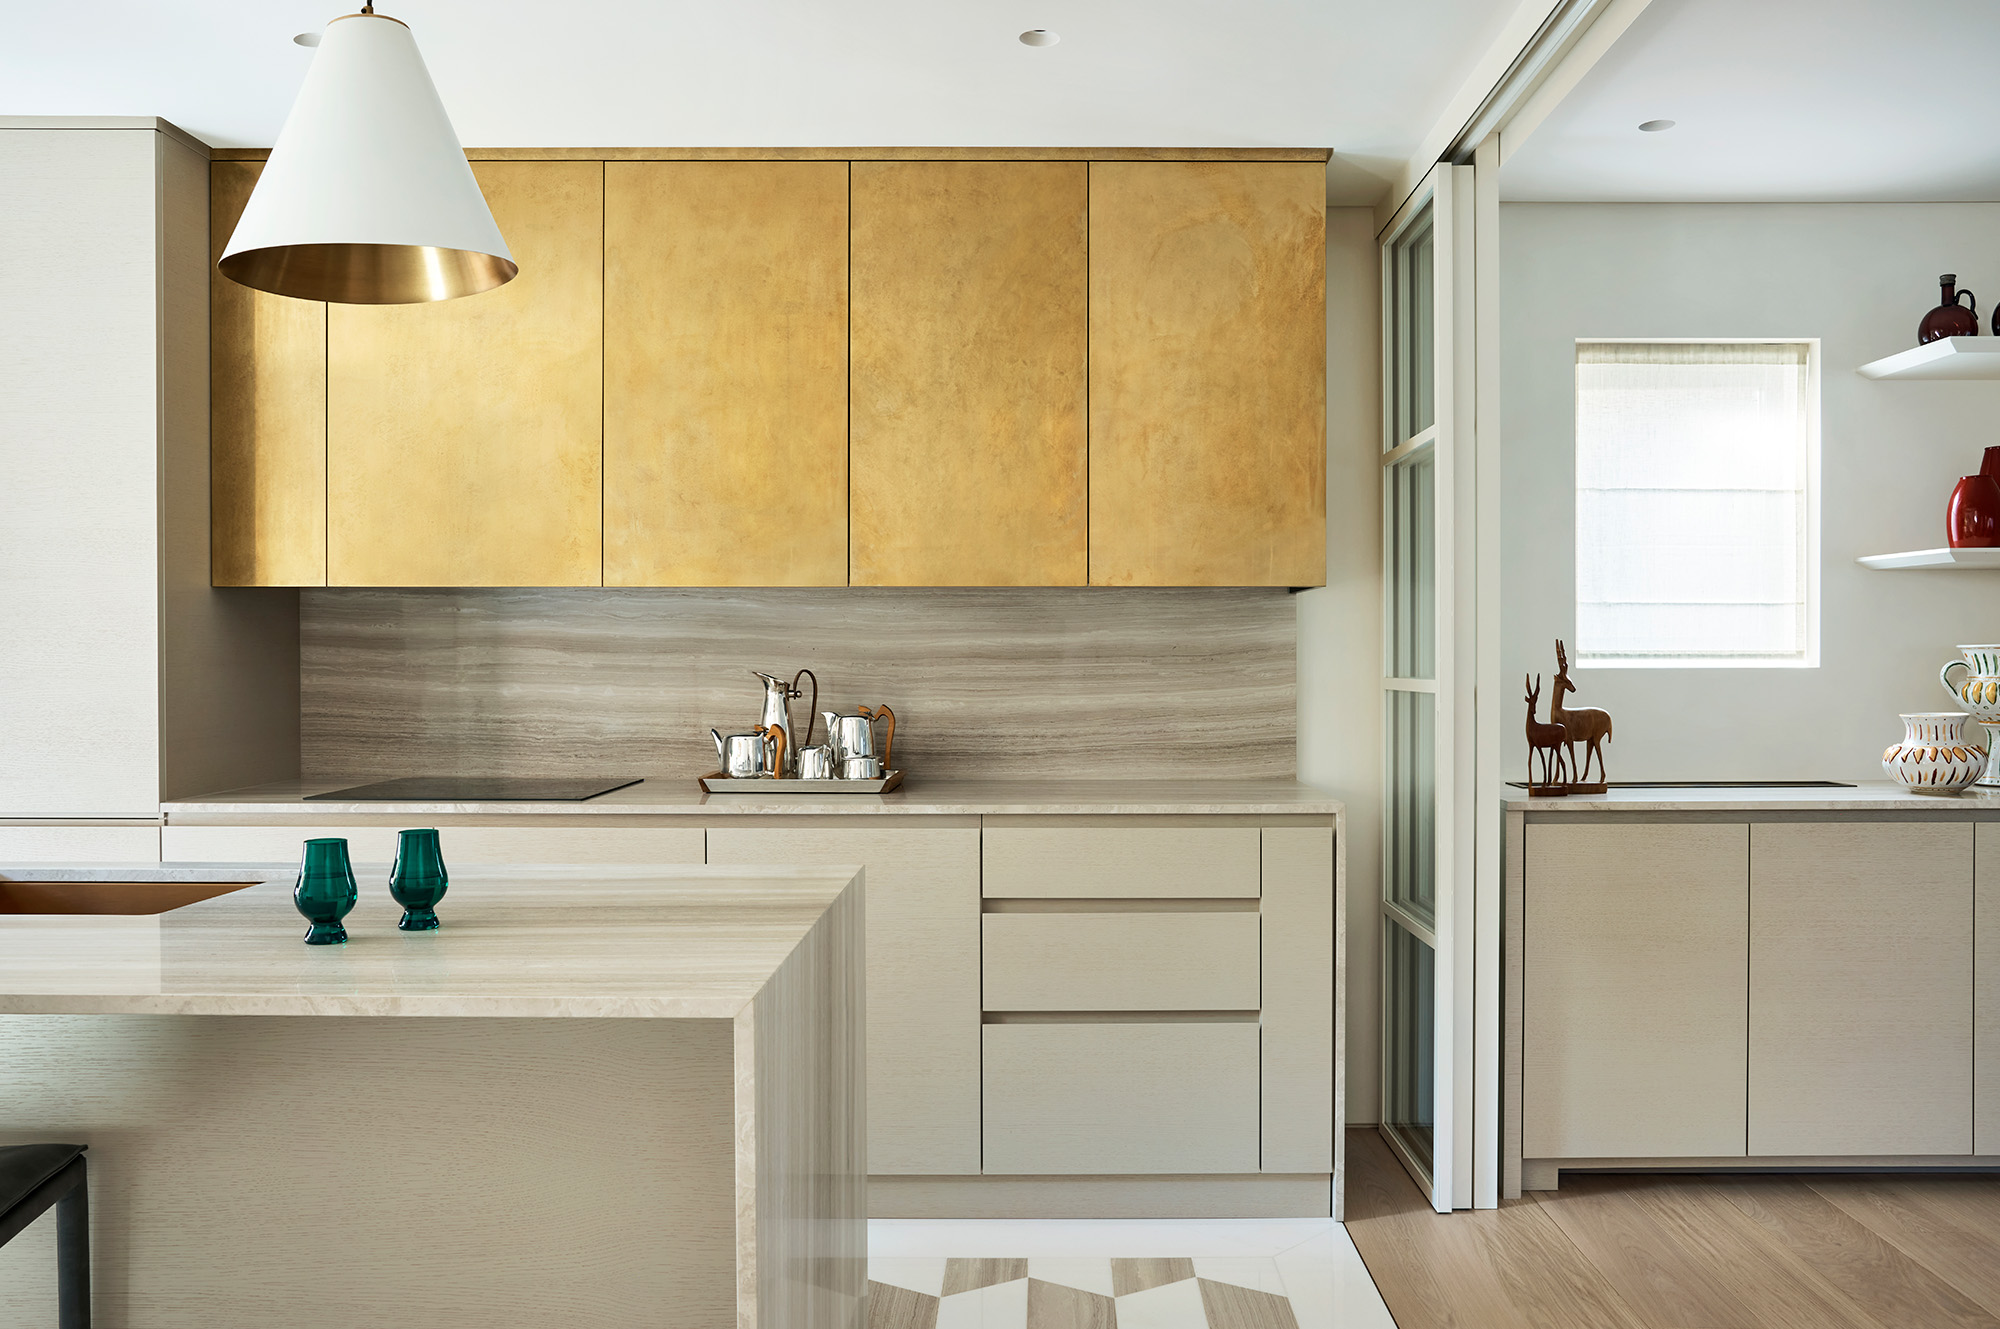 Bespoke open plan kitchen with silver travertine cabinetry and brass finishes.